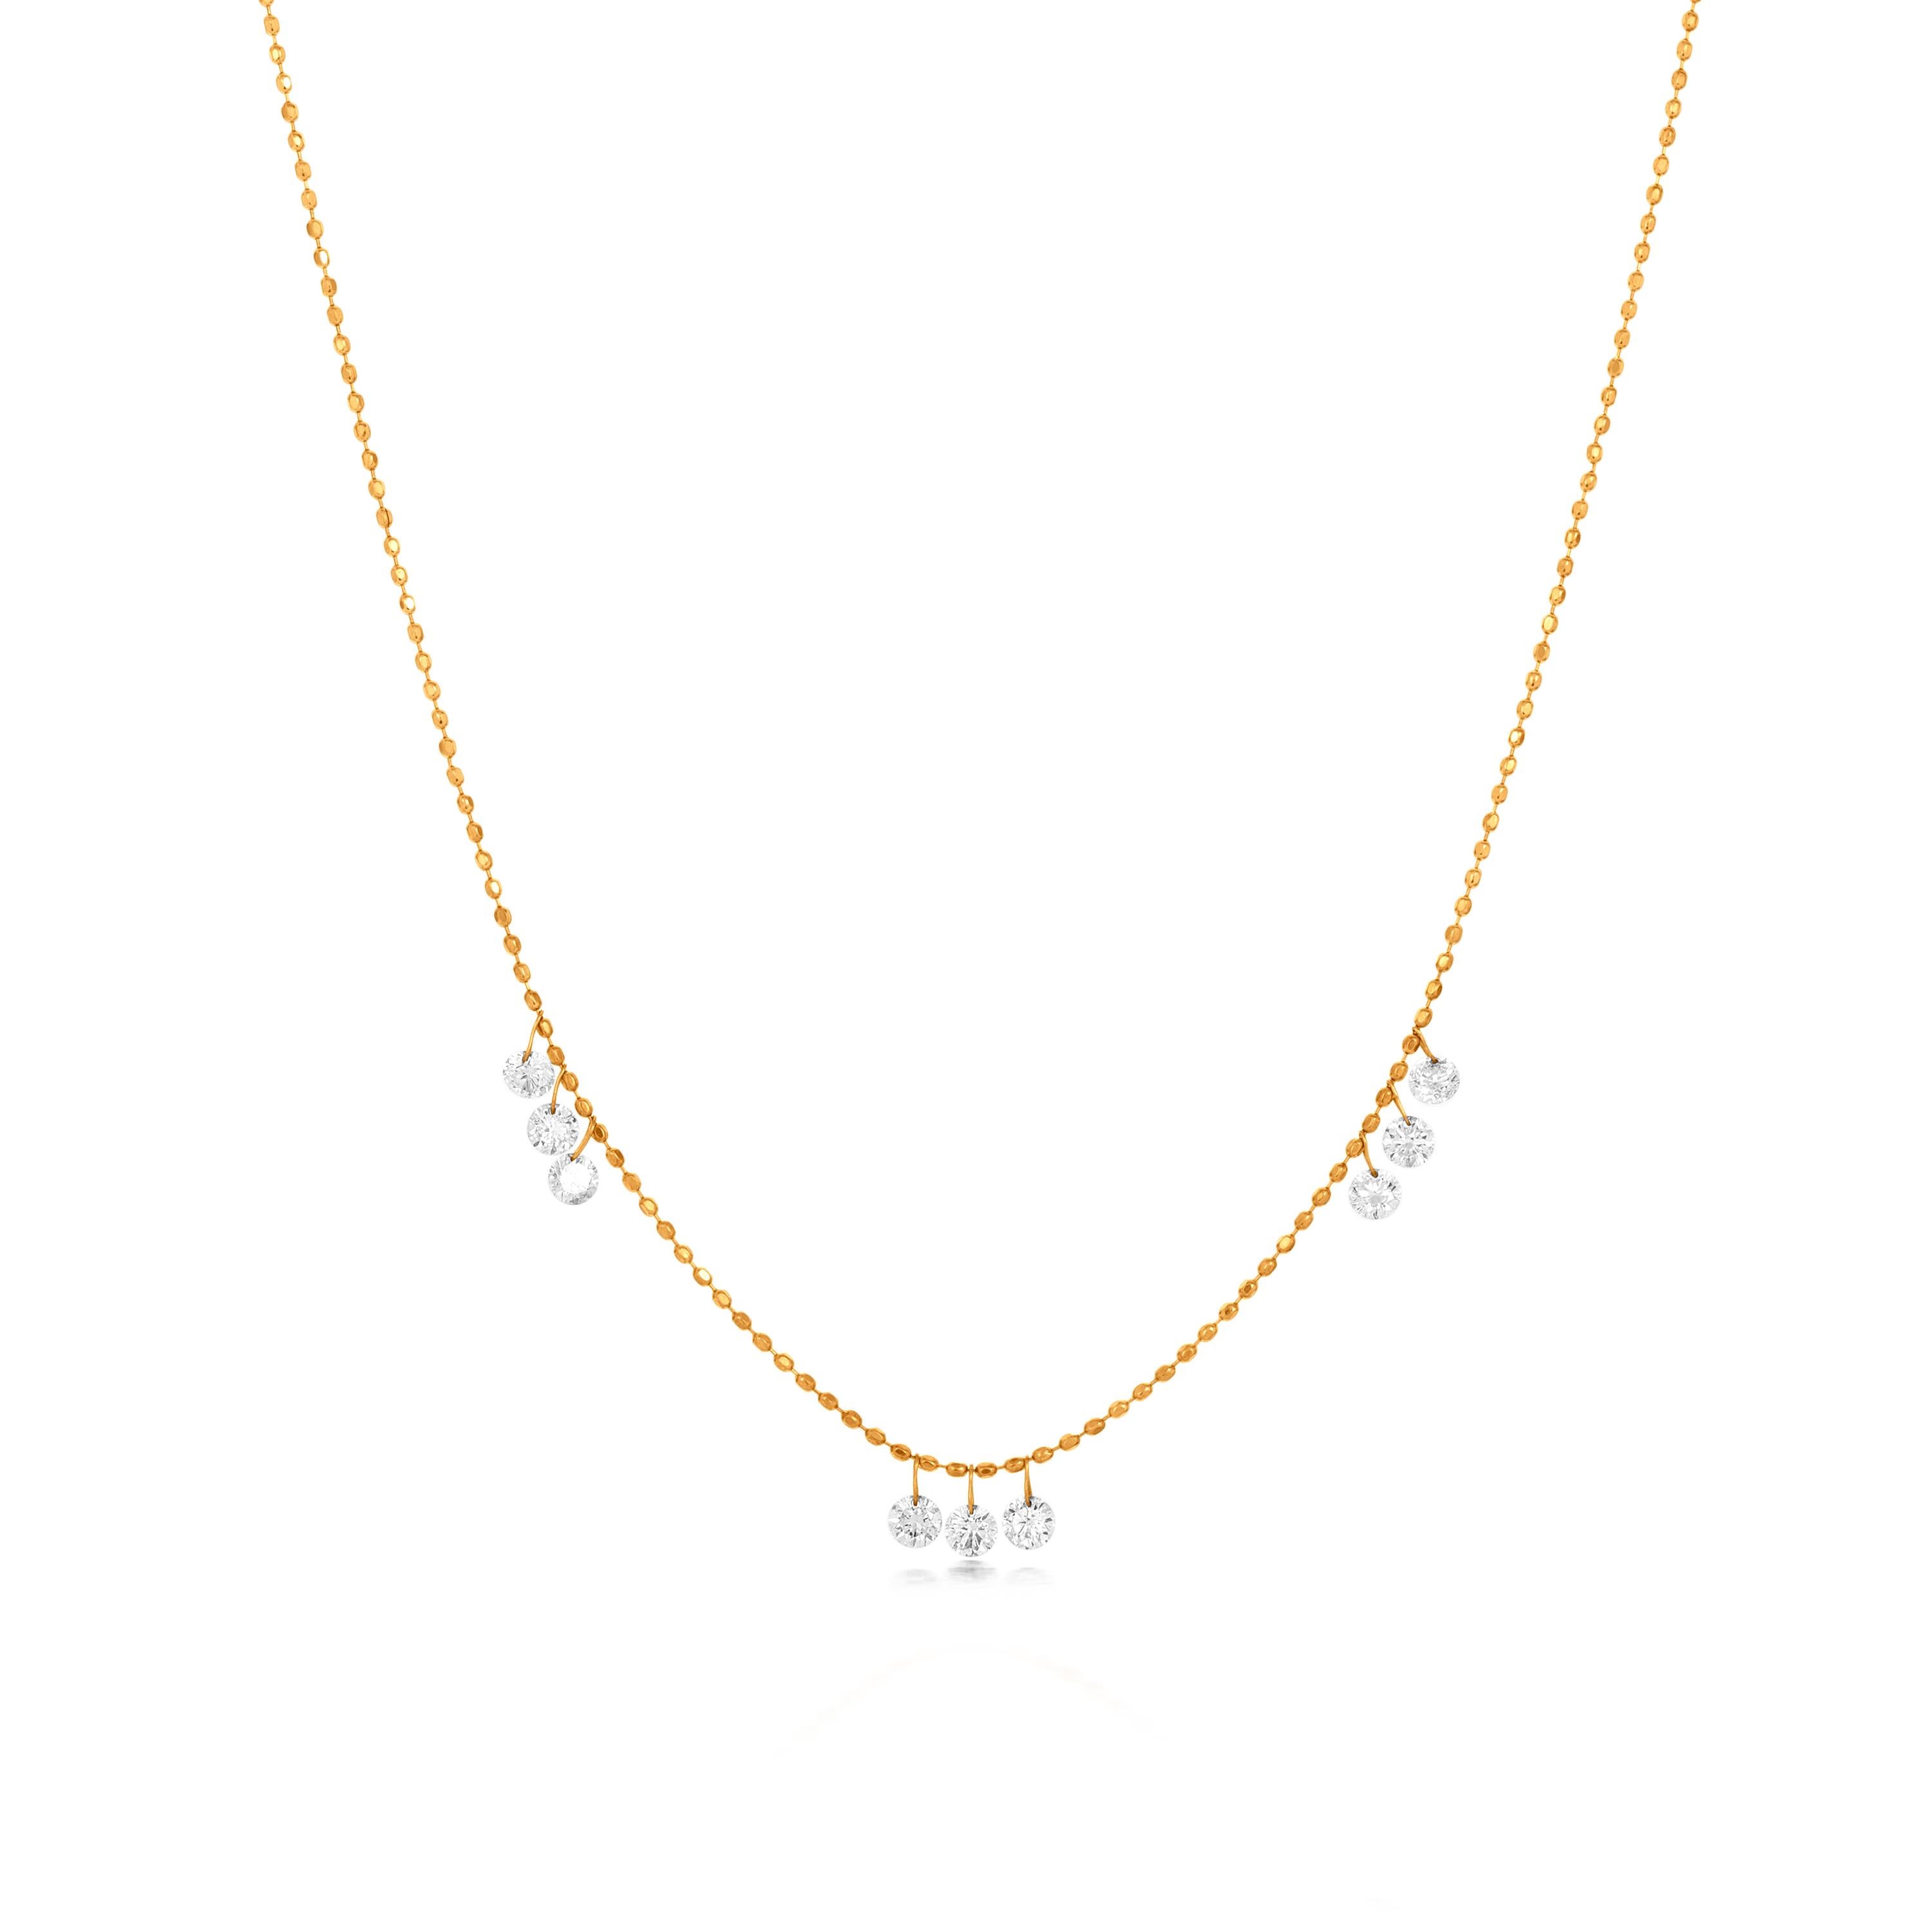 This Luxle 0.5 carat drill diamond frontal necklace is made with 9 drop-shaped motifs of round full cut white diamonds in 3 clusters. The round diamonds are suspended from an 18k yellow gold bead chain. This gold bead chain is 18 inches long and has